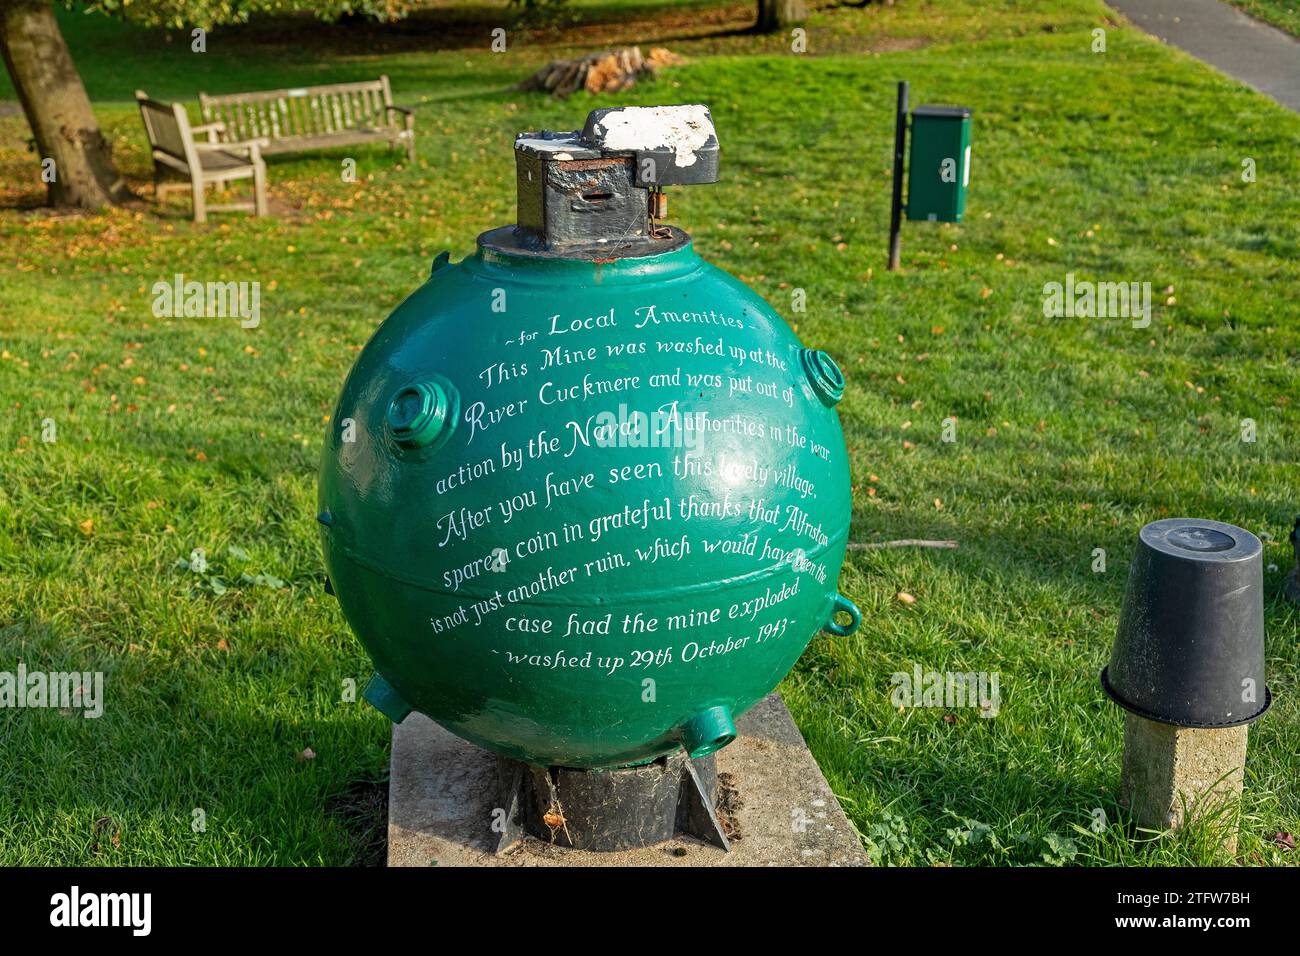 Bomb from World War Two which would have destroyed the whole village, if it had exploded, Alfriston, East Sussex, England, Great Britain Stock Photo